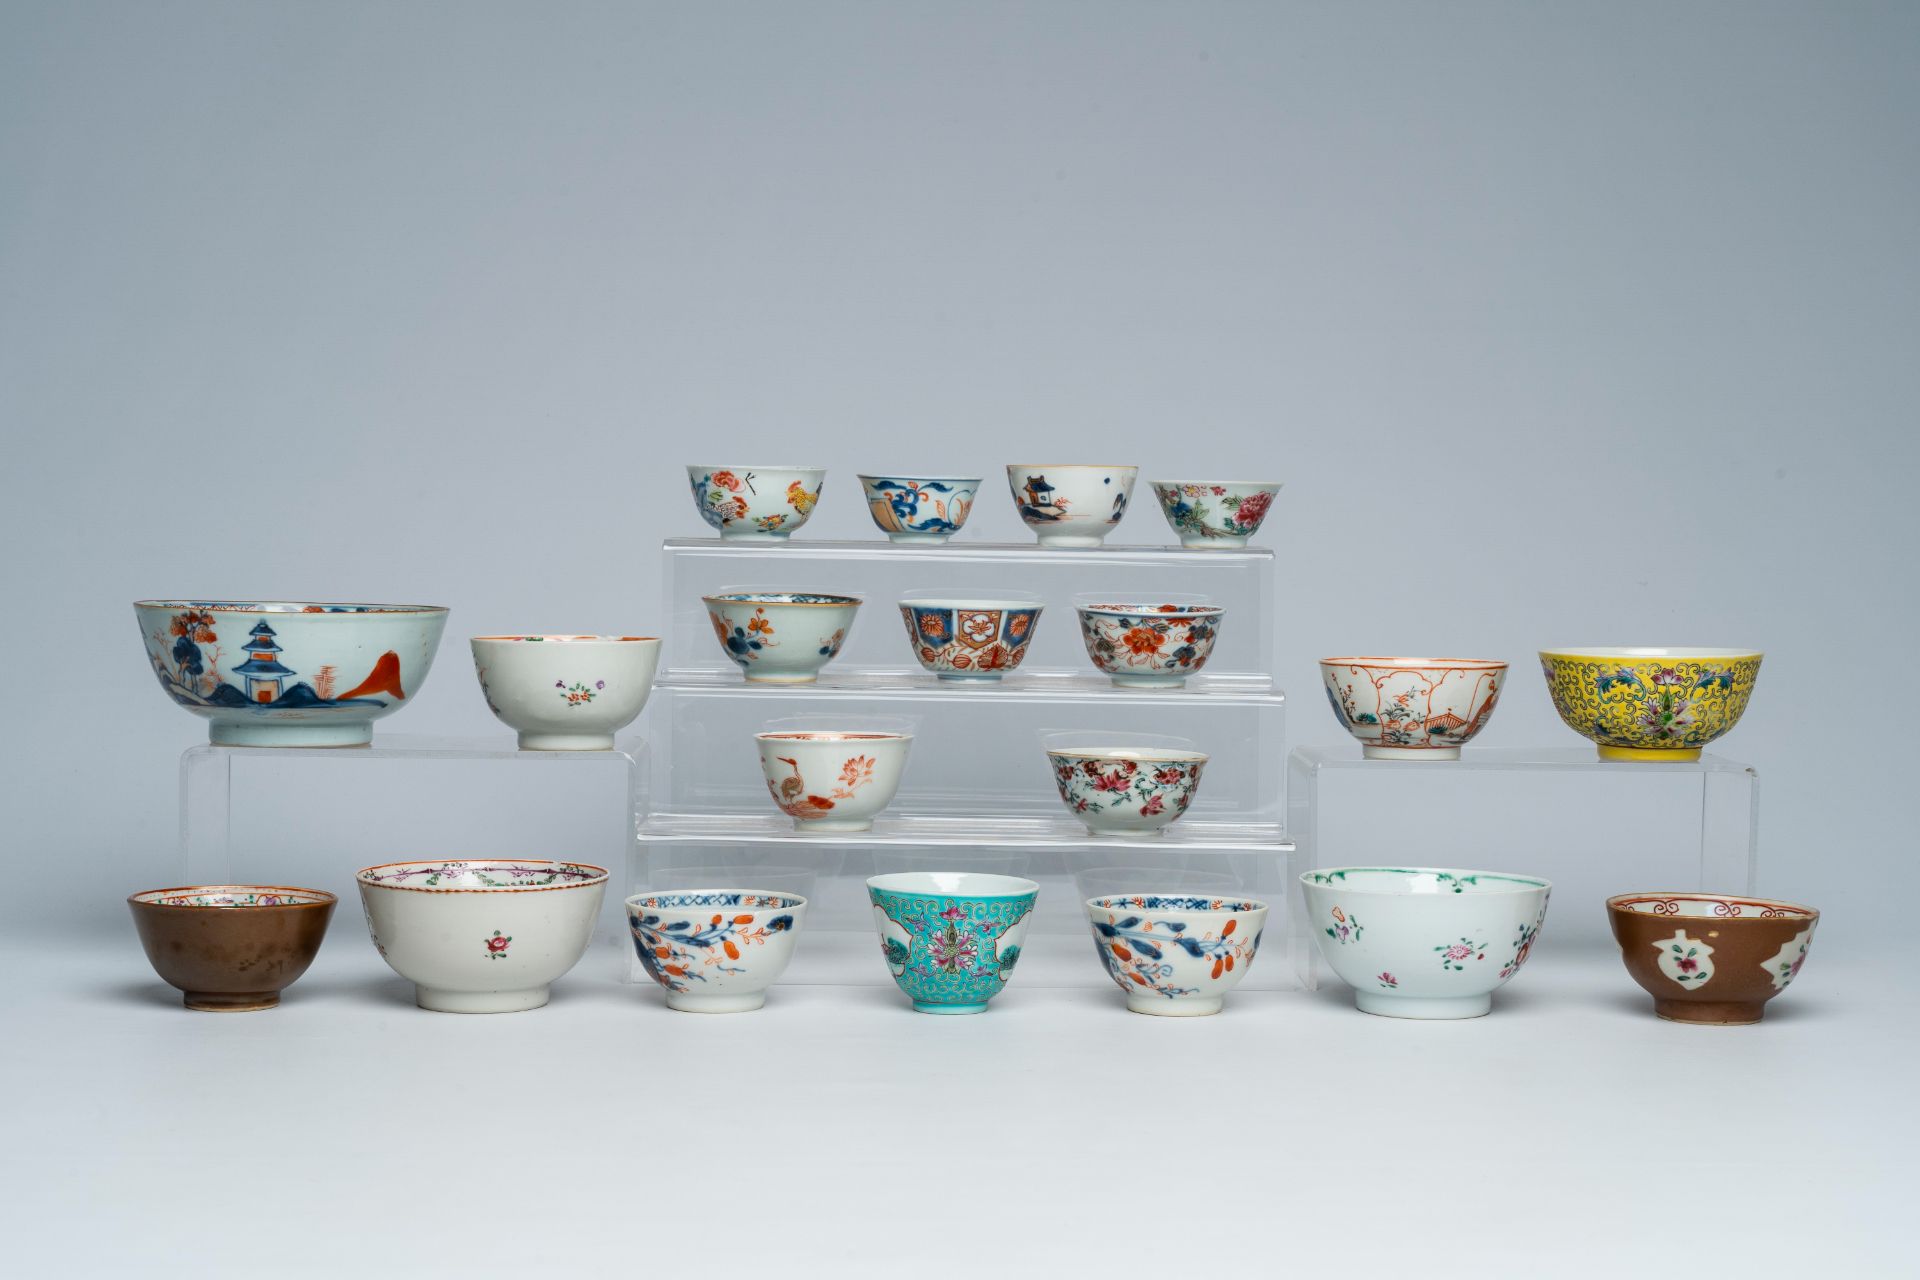 A varied collection of Chinese cups and saucers with various designs, 18th C. and later - Image 3 of 11